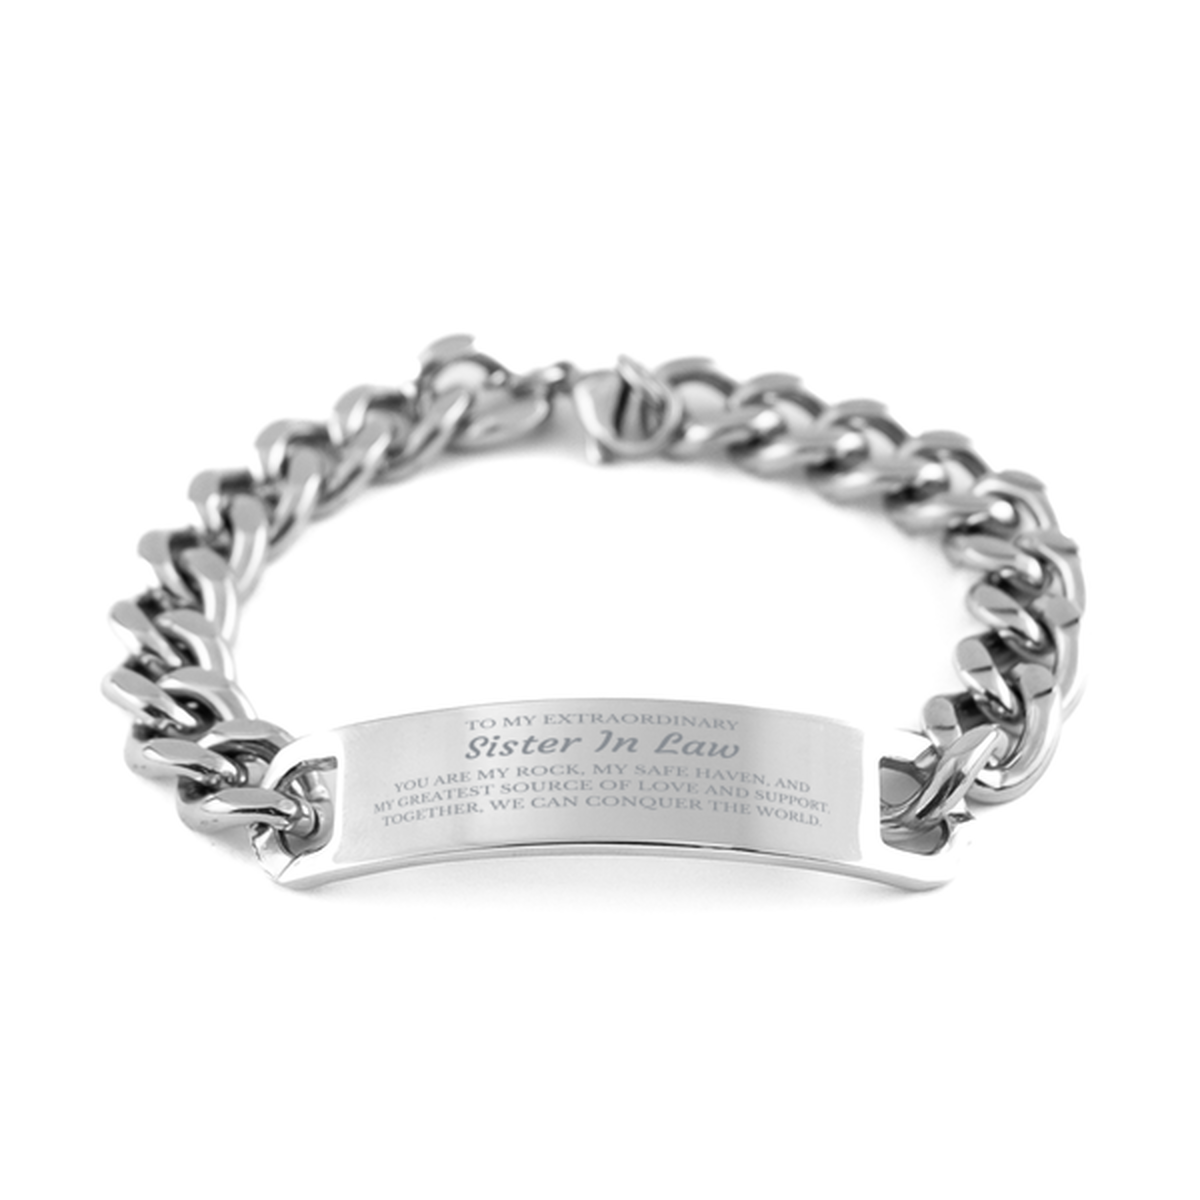 To My Extraordinary Sister In Law Gifts, Together, we can conquer the world, Birthday Cuban Chain Stainless Steel Bracelet For Sister In Law, Christmas Gifts For Sister In Law